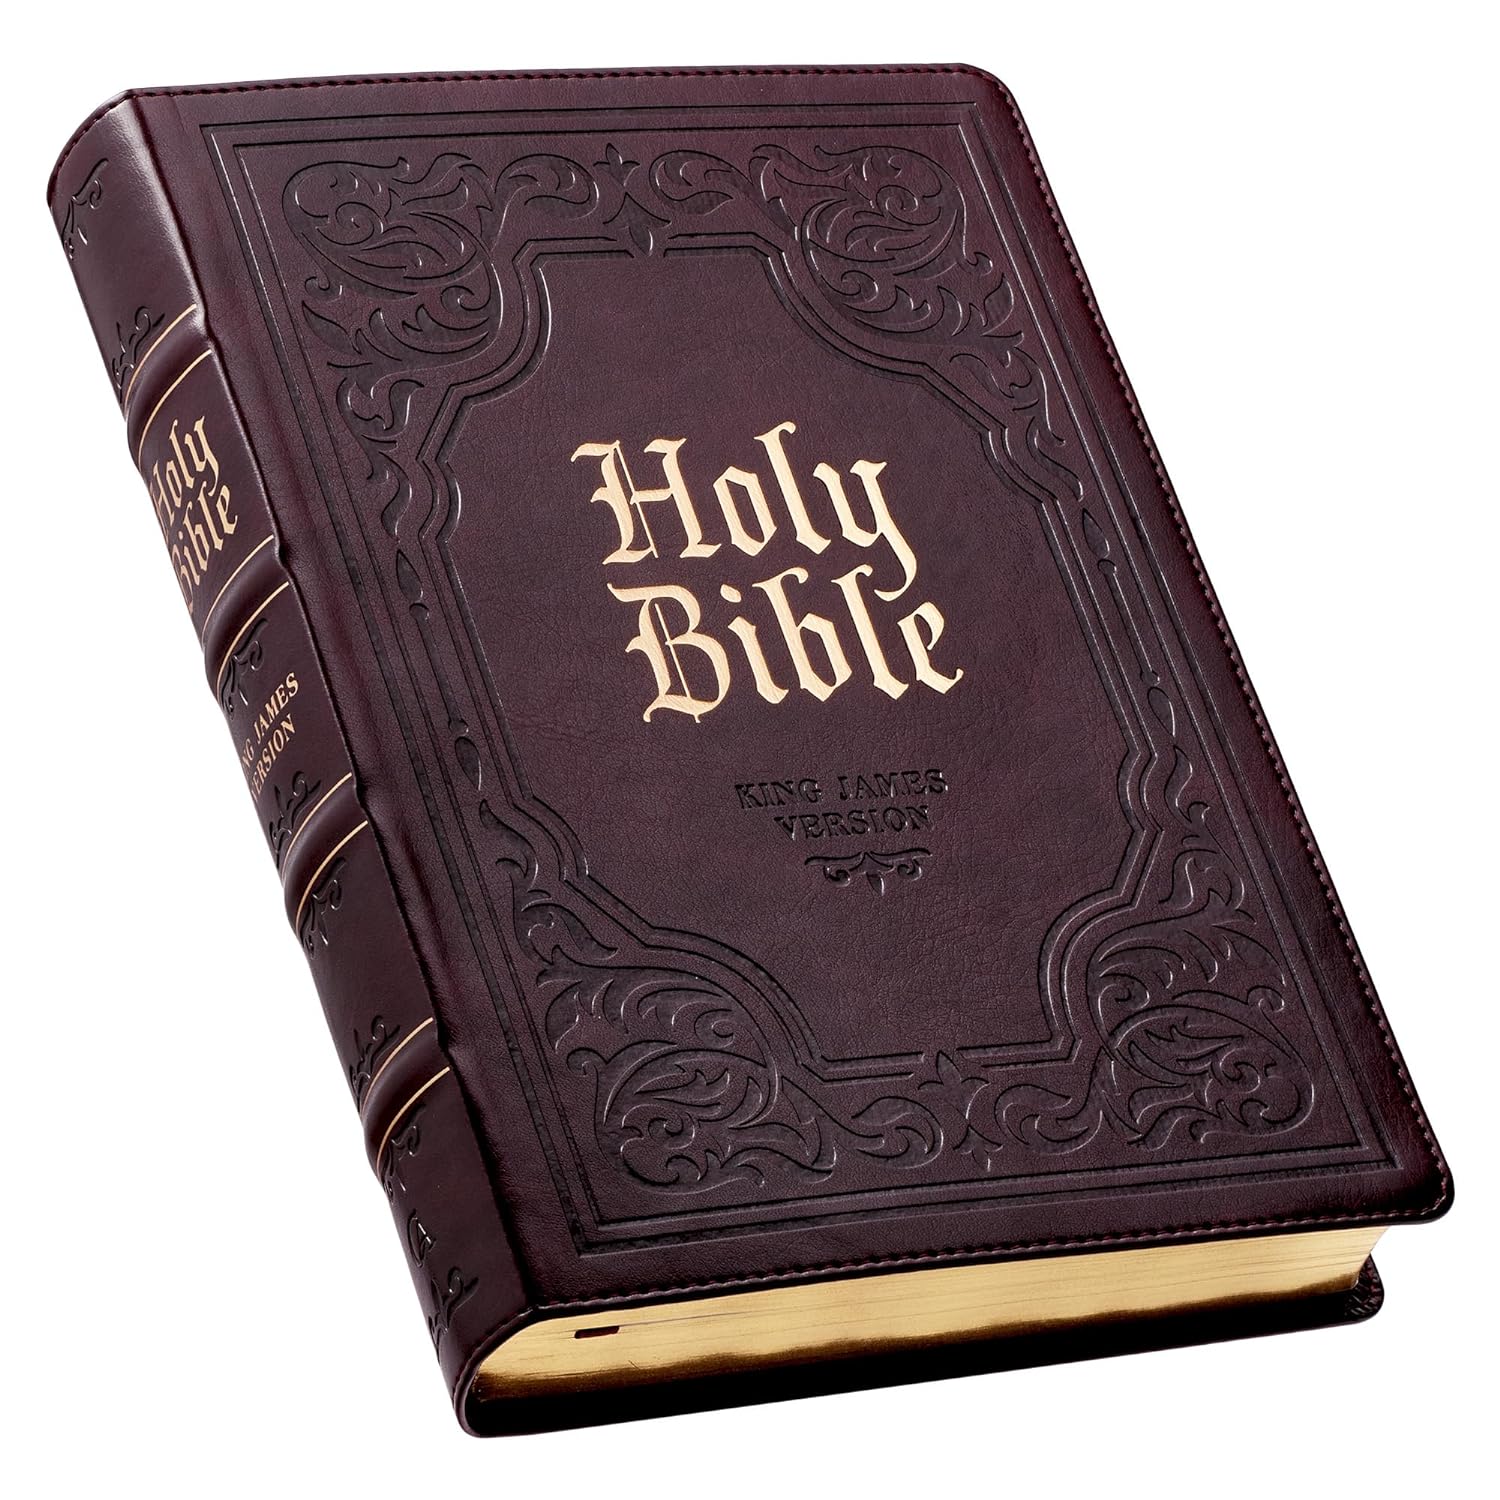 STATE SUPERINTENDENT WALTERS ISSUES MEMO TO REQUIRE BIBLES IN EVERY OKLAHOMA CLASSROOM